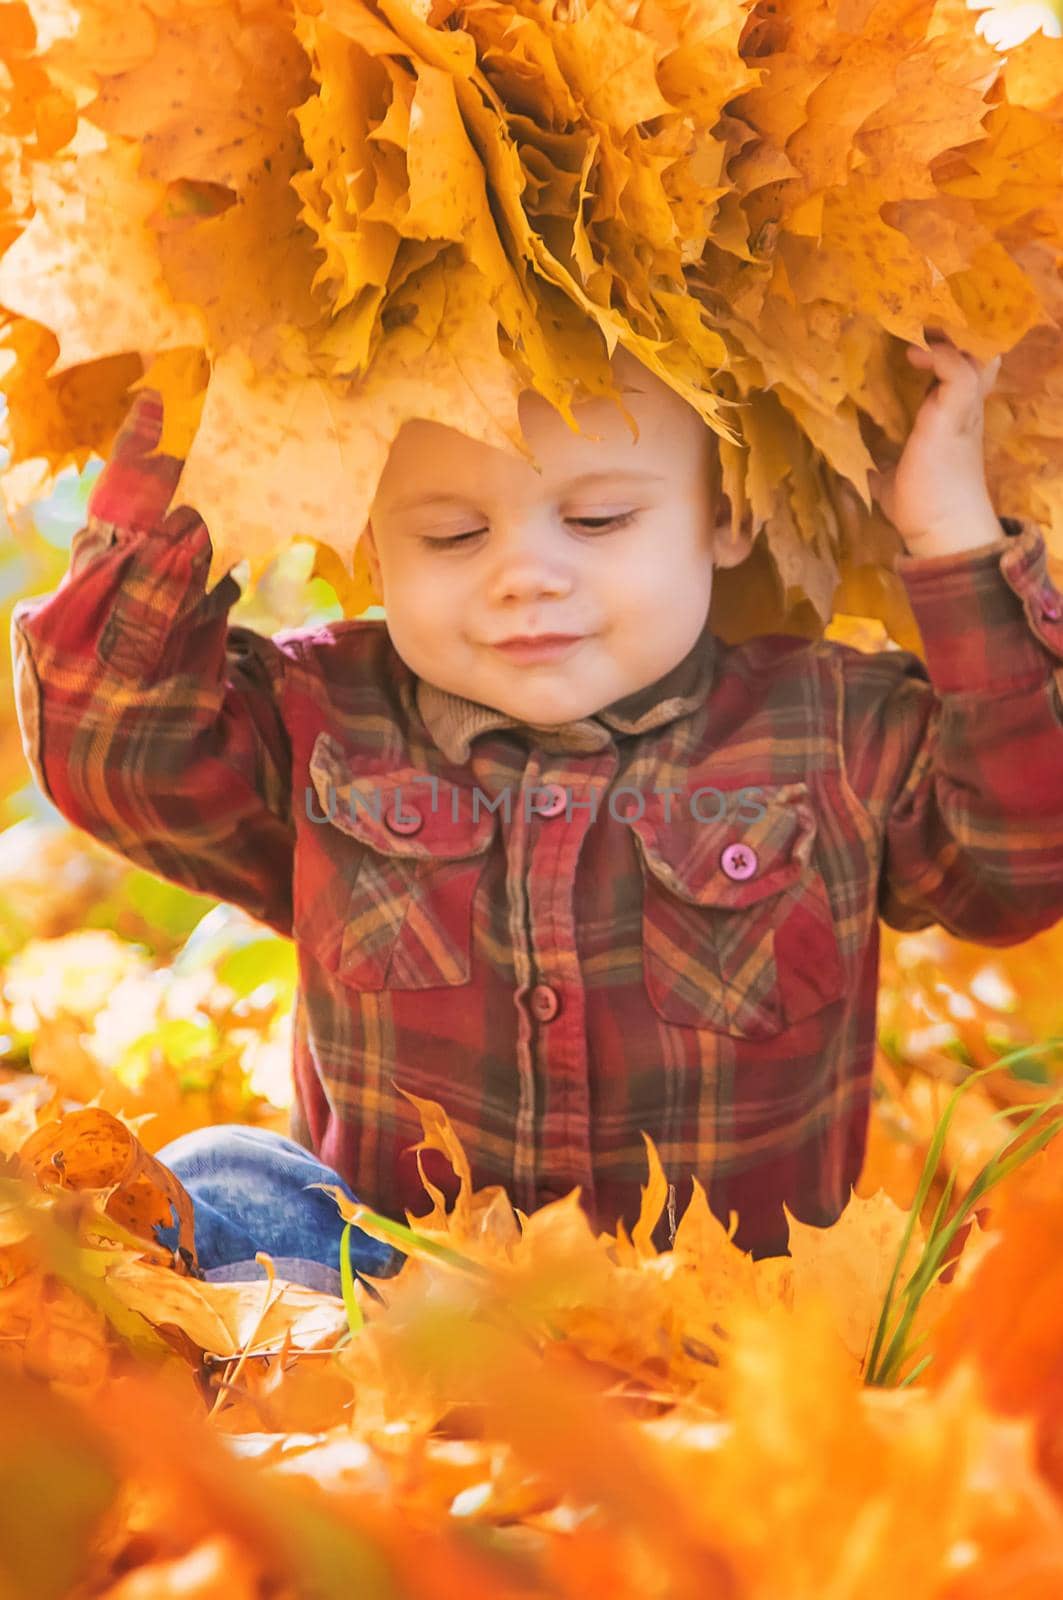 Little kid boy in the park on autumn leaves. Selective focus.